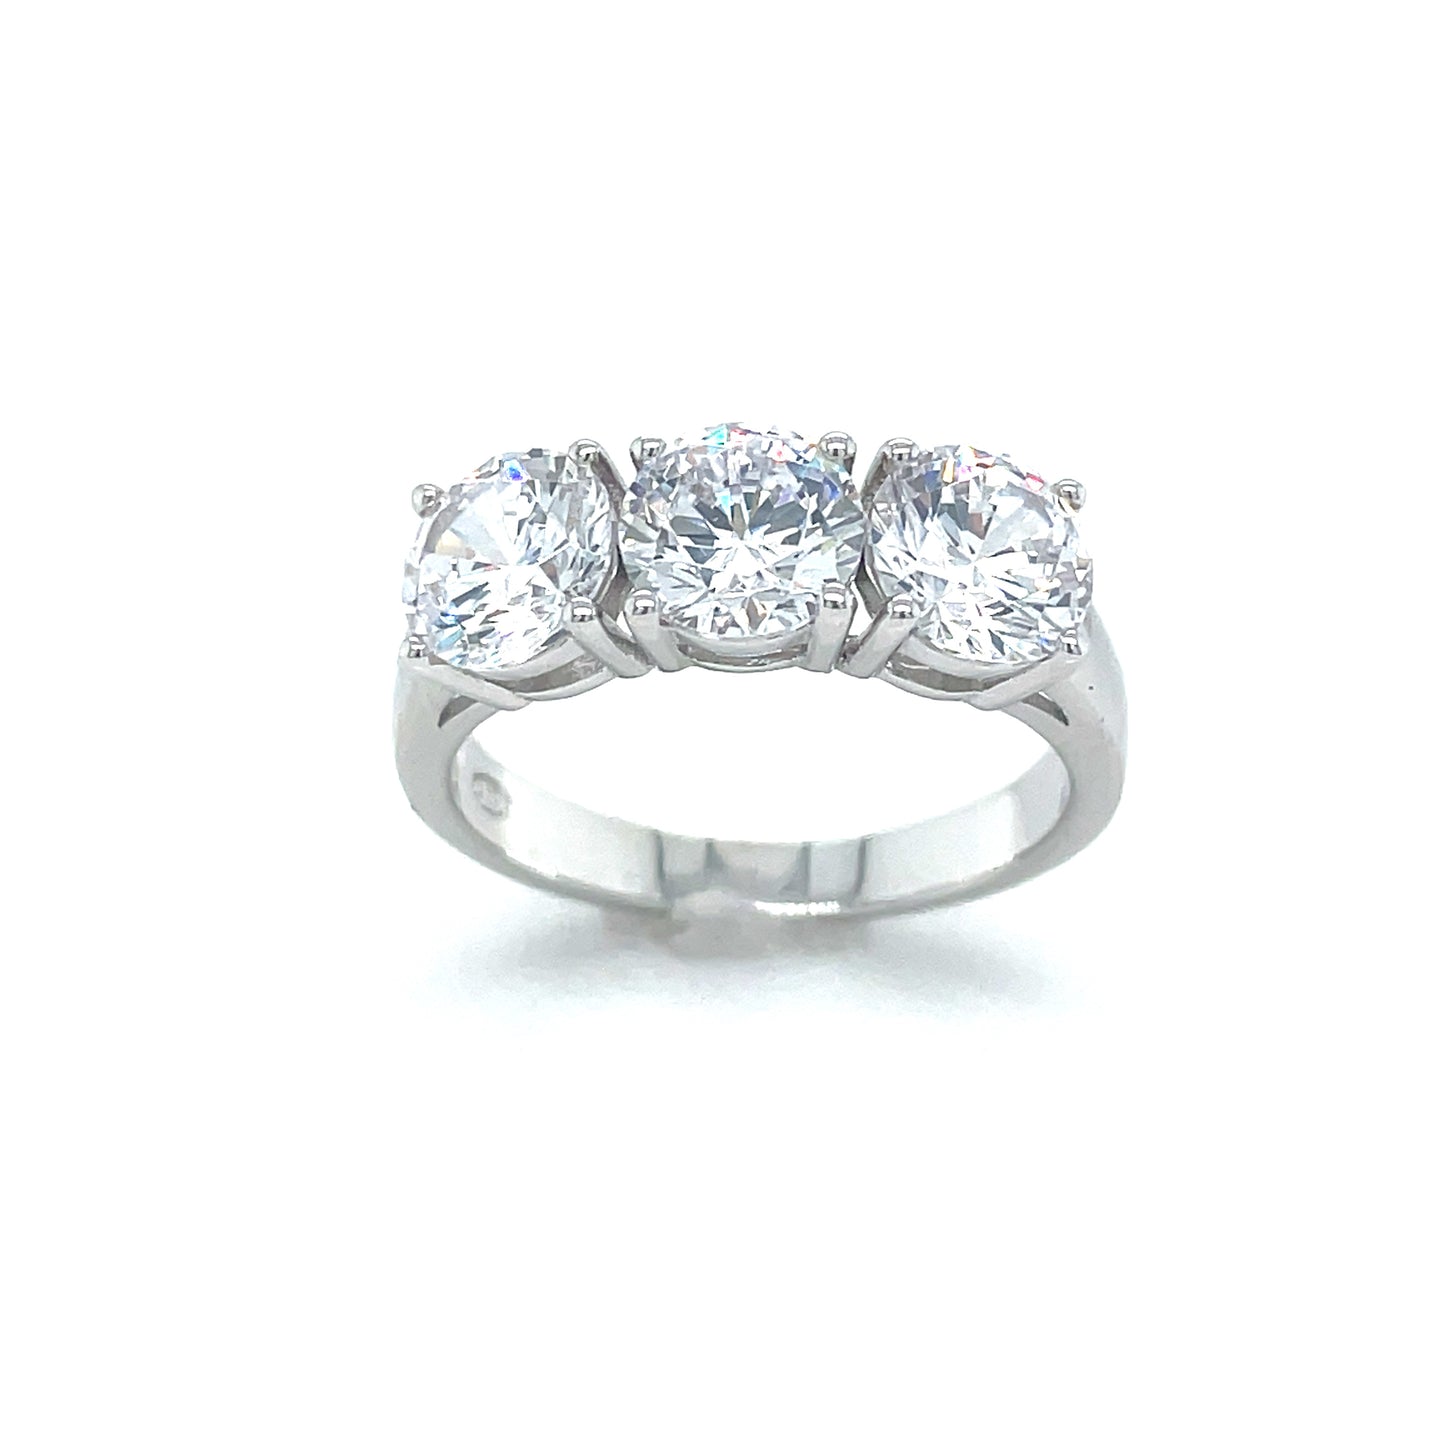 Sterling Silver Three Stone 6mm Cubic Zirconia Dress Ring